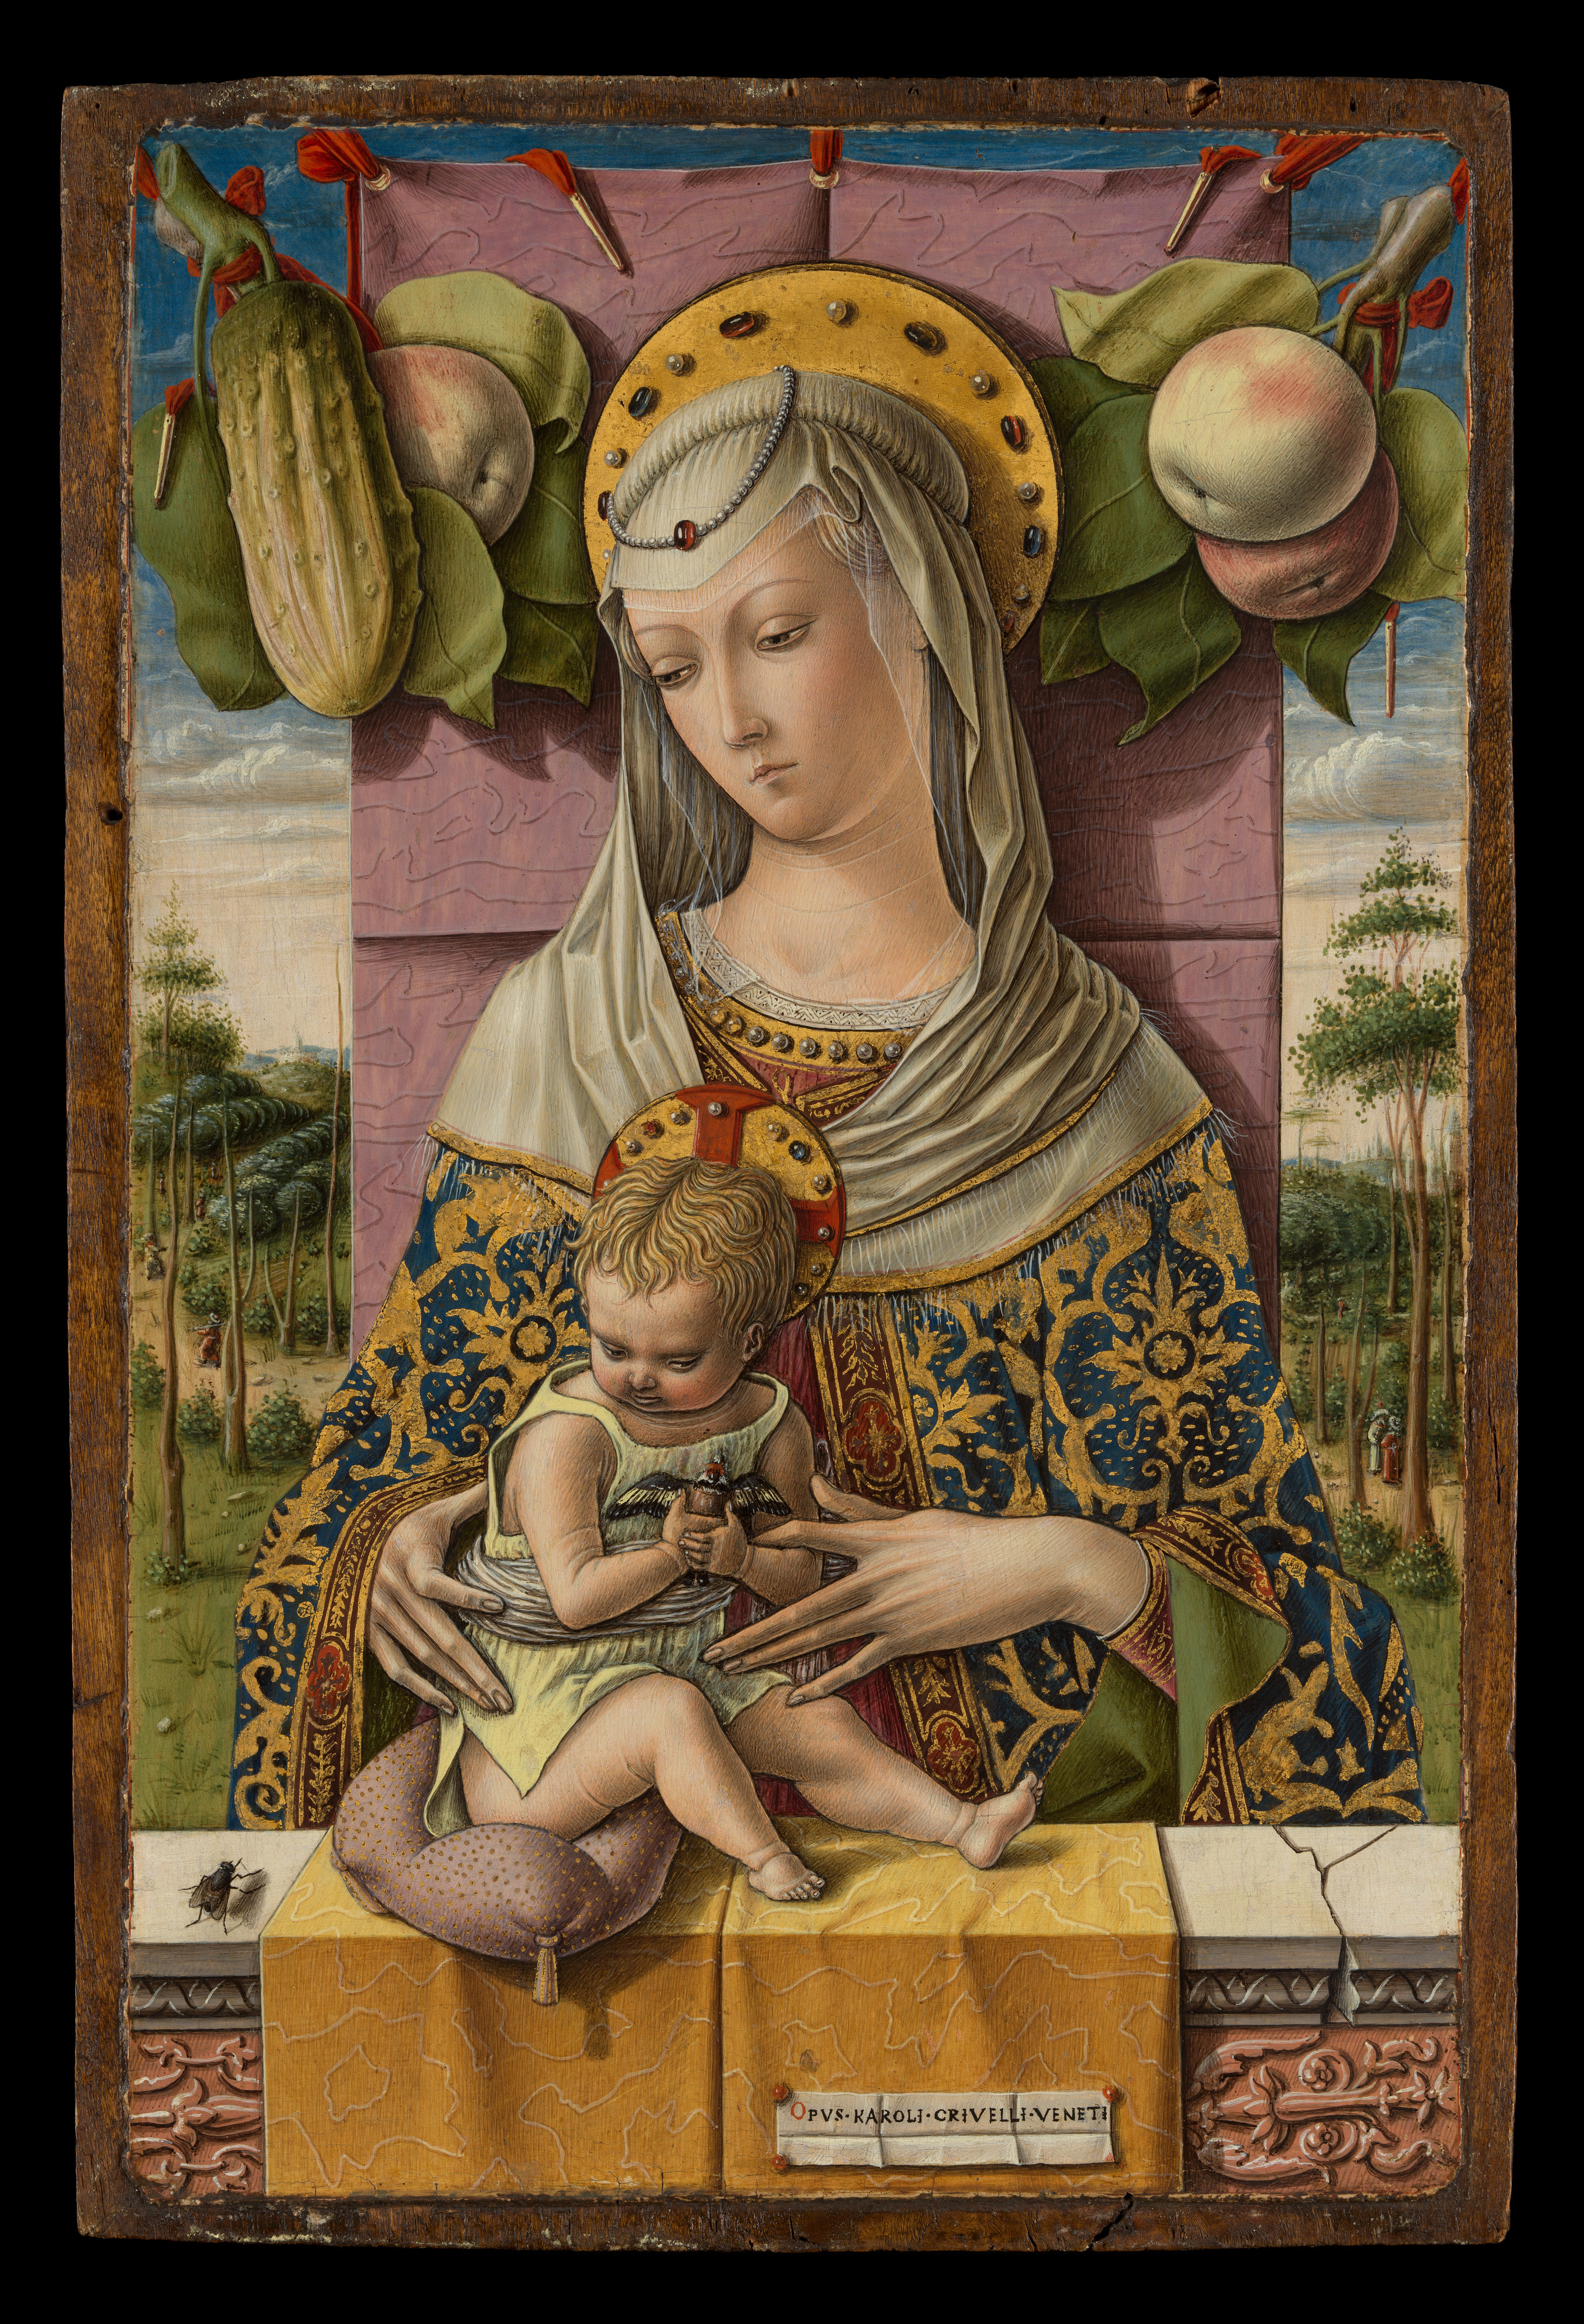 Madonna and Child by Carlo Crivelli - ca. 1480 - 37.8 x 25.4 cm Metropolitan Museum of Art